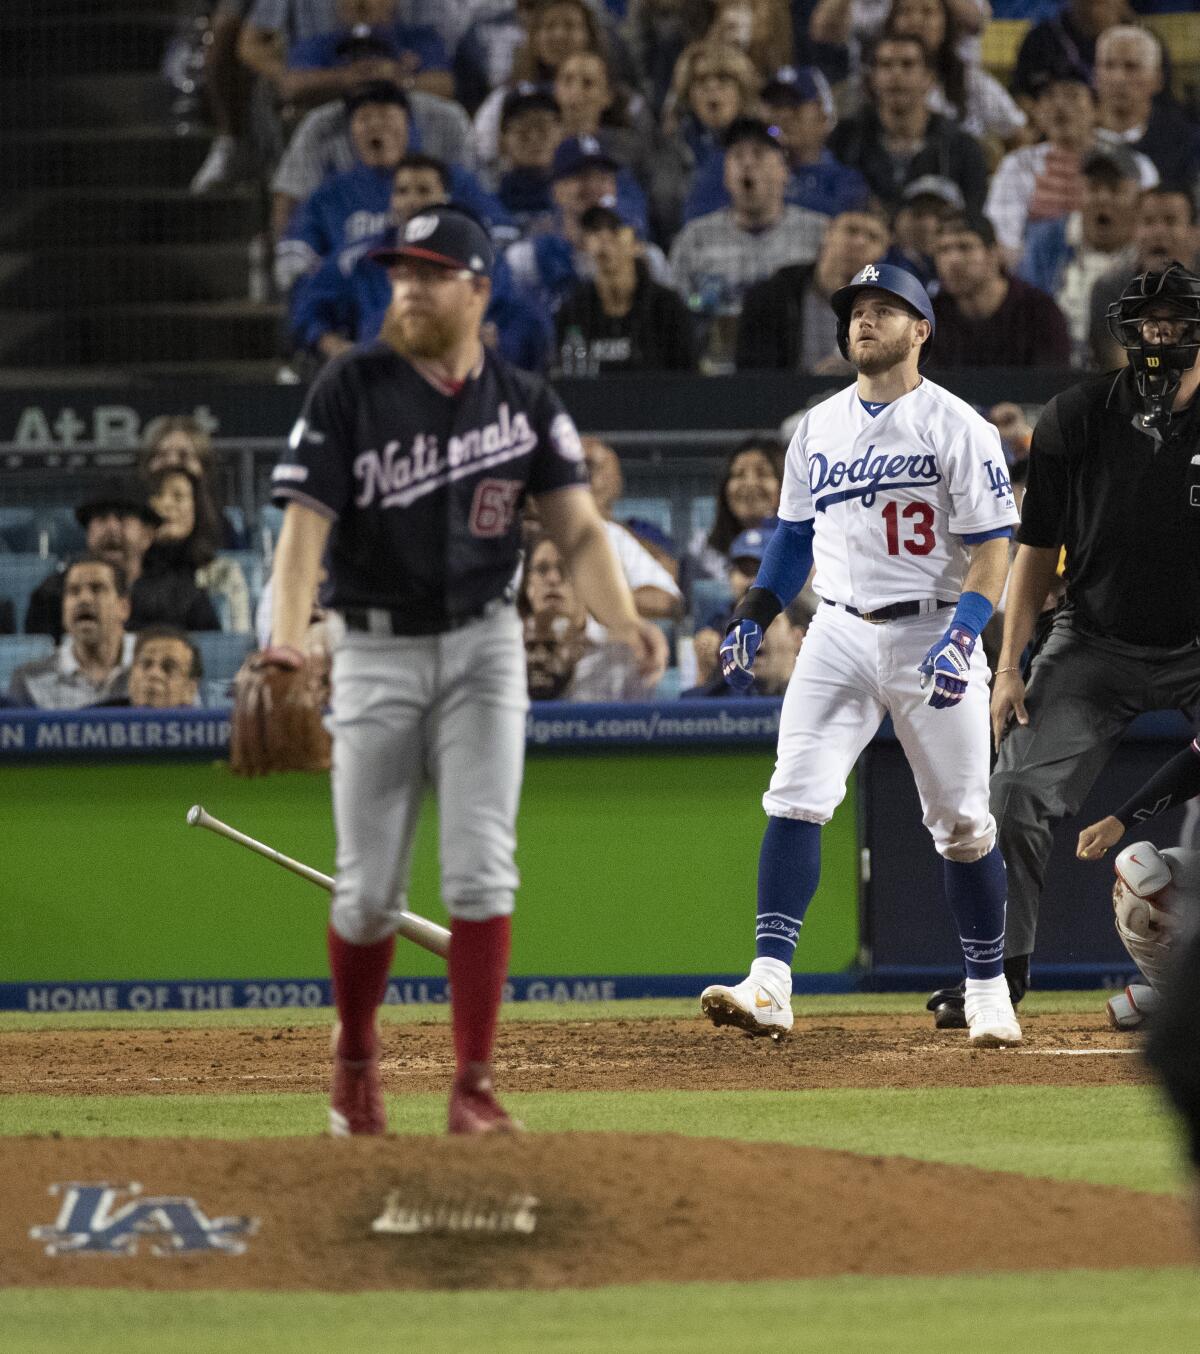 Los Angeles Dodgers first baseman Max Muncy watches his home run ball against Washington Nationals relief pitcher Sean Doolittle in the 7th inning.